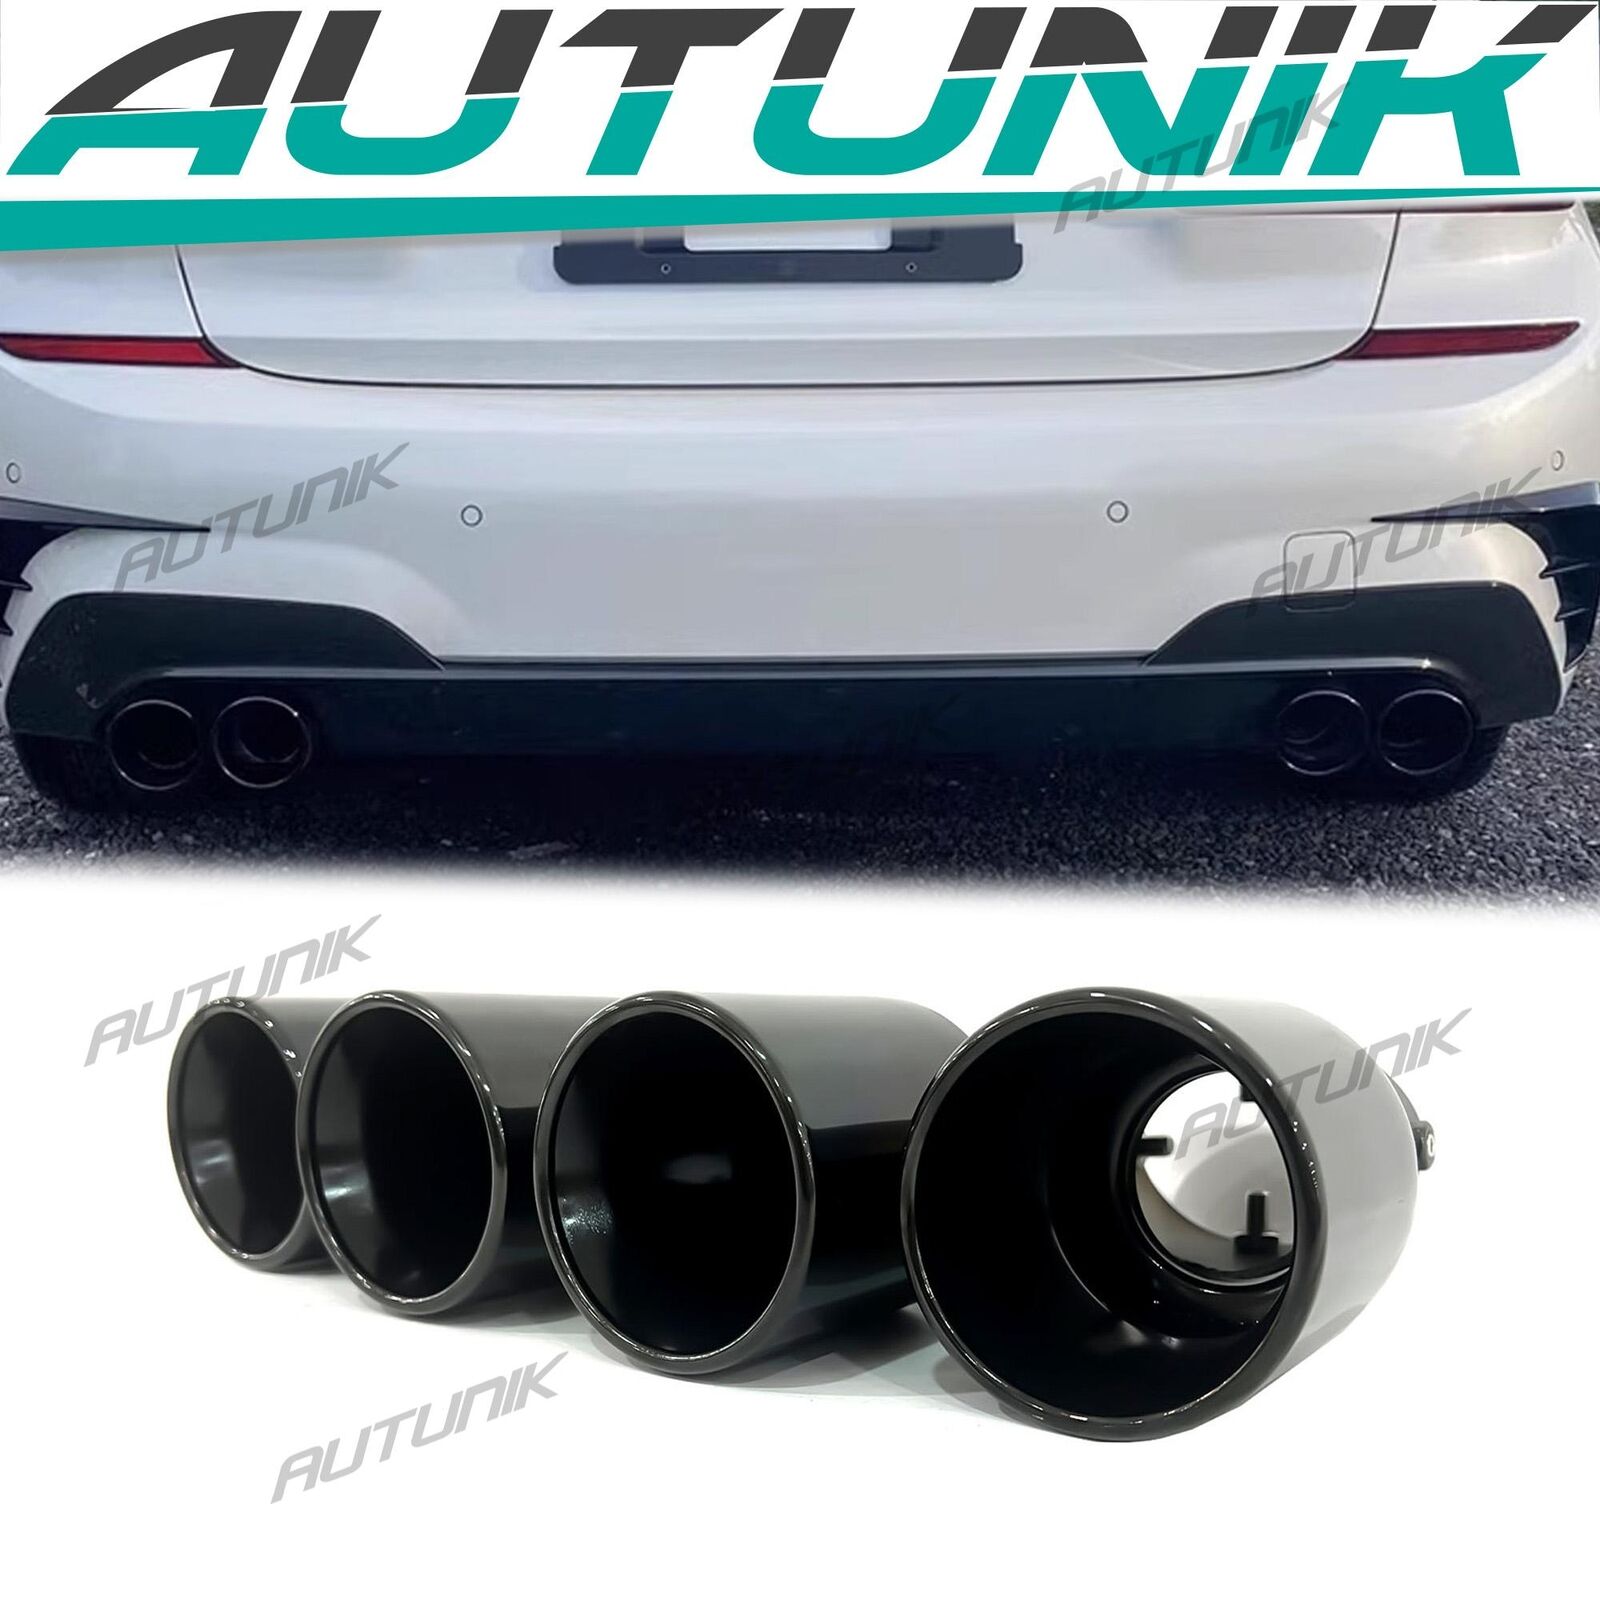 Quad Exhaust Tips for 2020+ BMW G20 M340i G42 M440i G23 G26 M220i Muffler Pipes